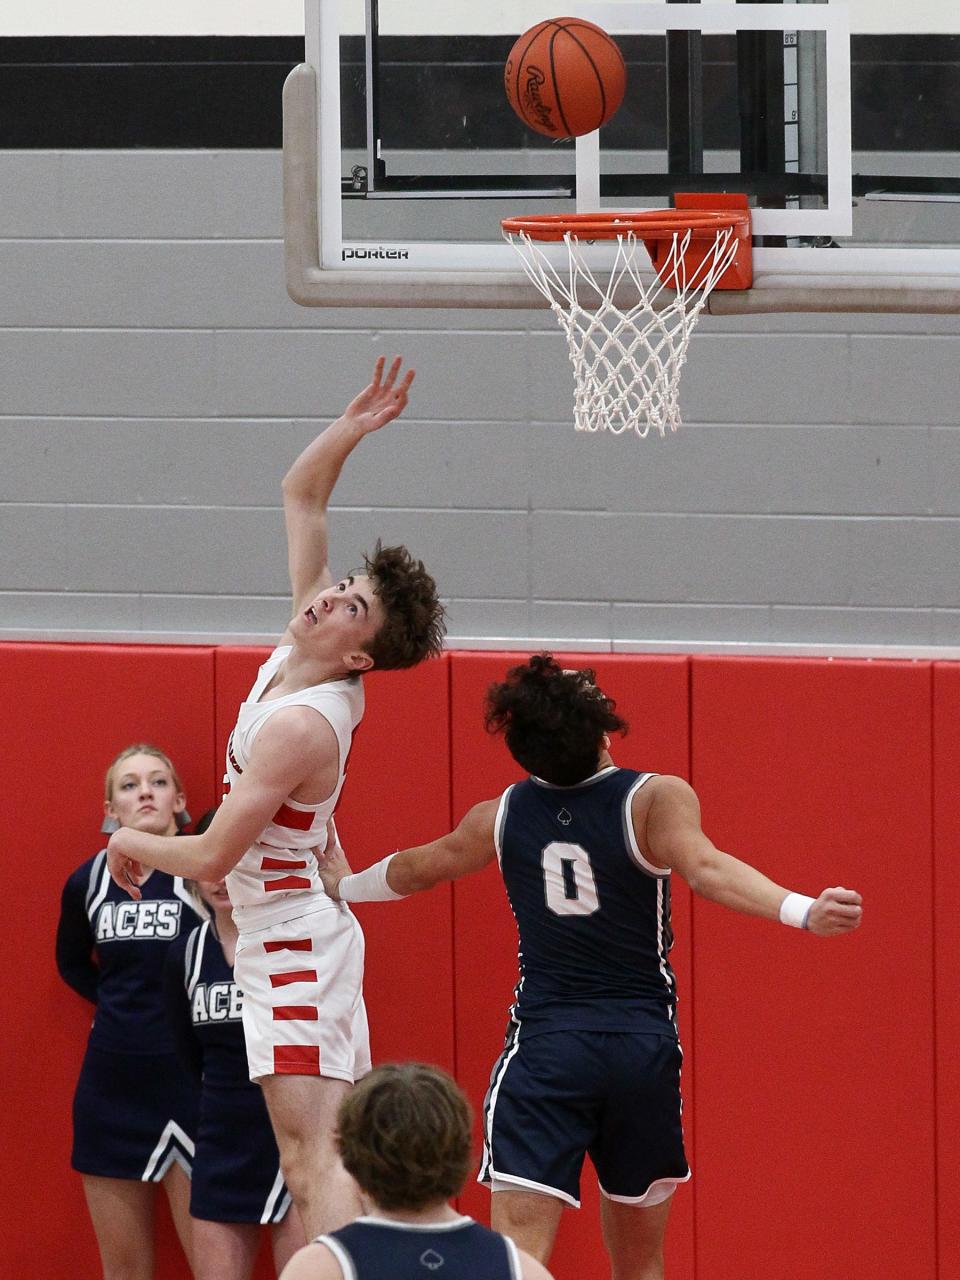 Johnstown senior Drew Brett makes a difficult shot over Granville junior Dante Varrasso Wednesday night during the Johnnies' 49-31 victory over the visiting Blue Aces.